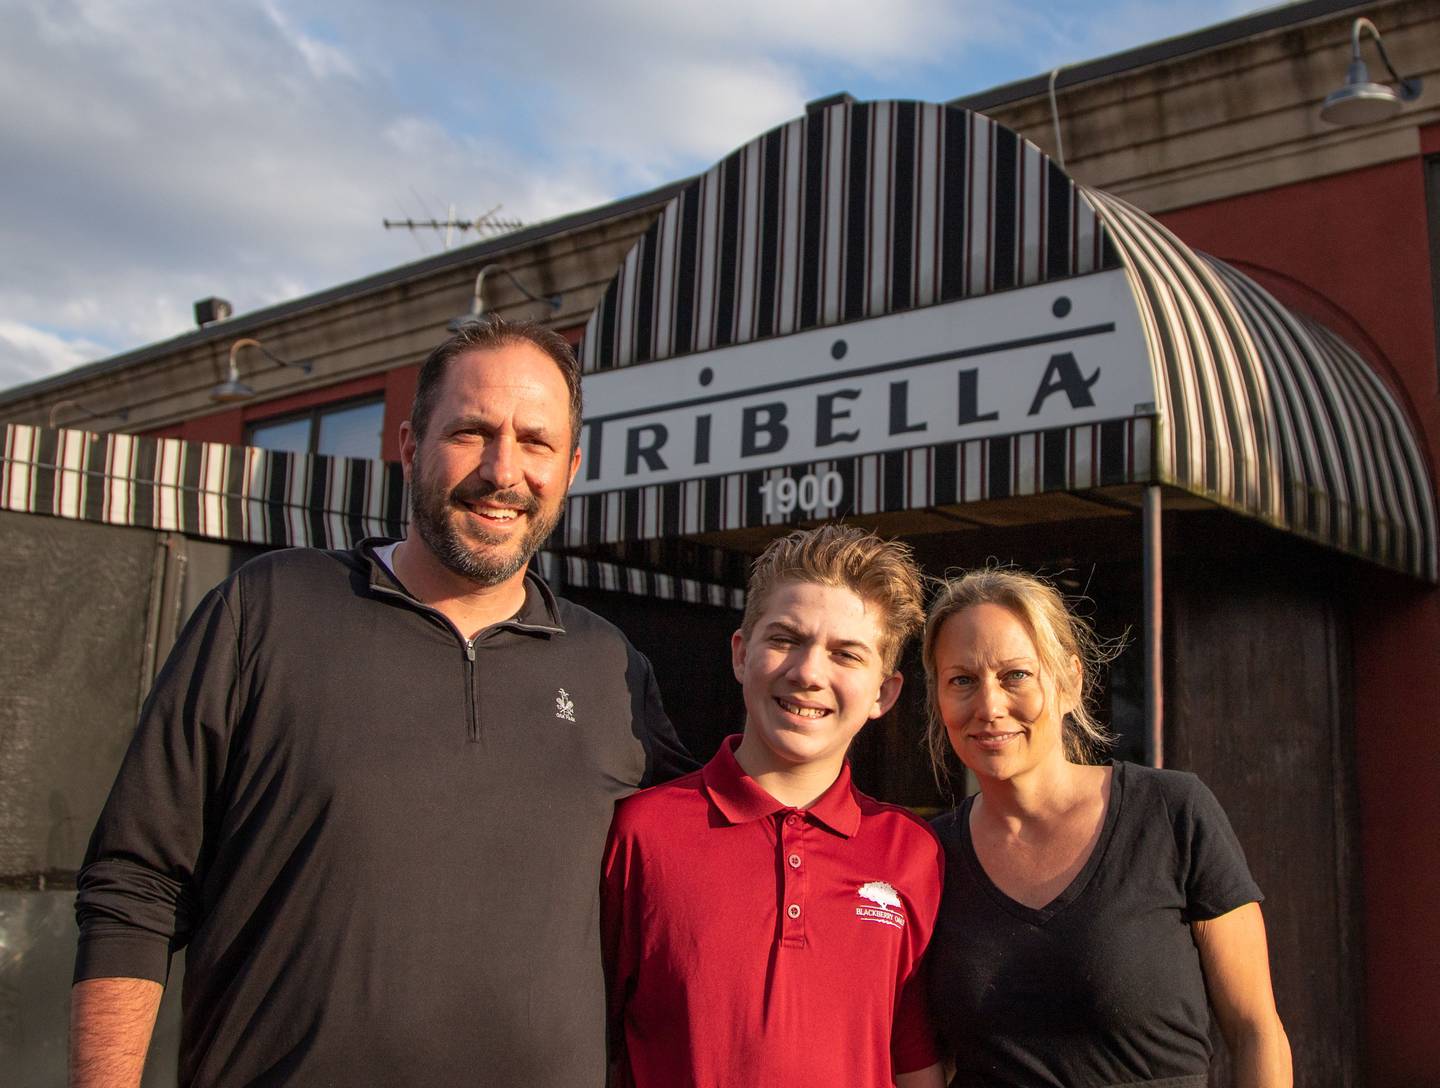 Co-Owner s Joe, left, and Christine,right, DiGuglielmo pose with their son Joe DiGuglielmo in front of Tribella Bar and Grill in Batavia on Sunday, March 26, 2023, the last day their restaurant was open.